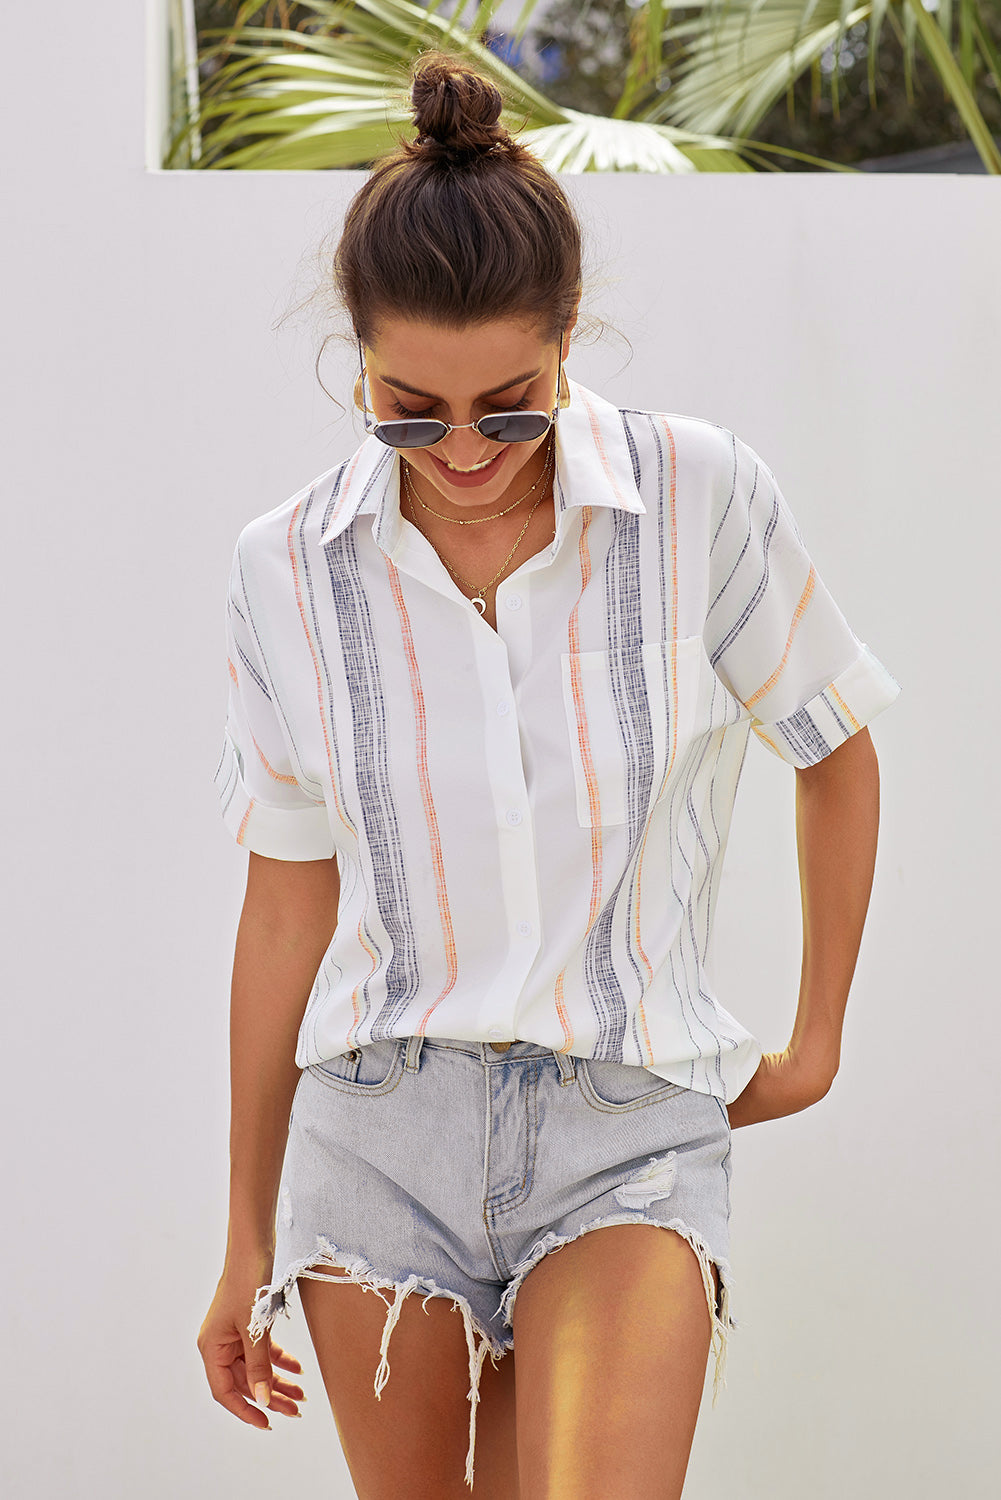 Fashionable Cotton Blend Blue And White Striped Button Up Shirt Womens